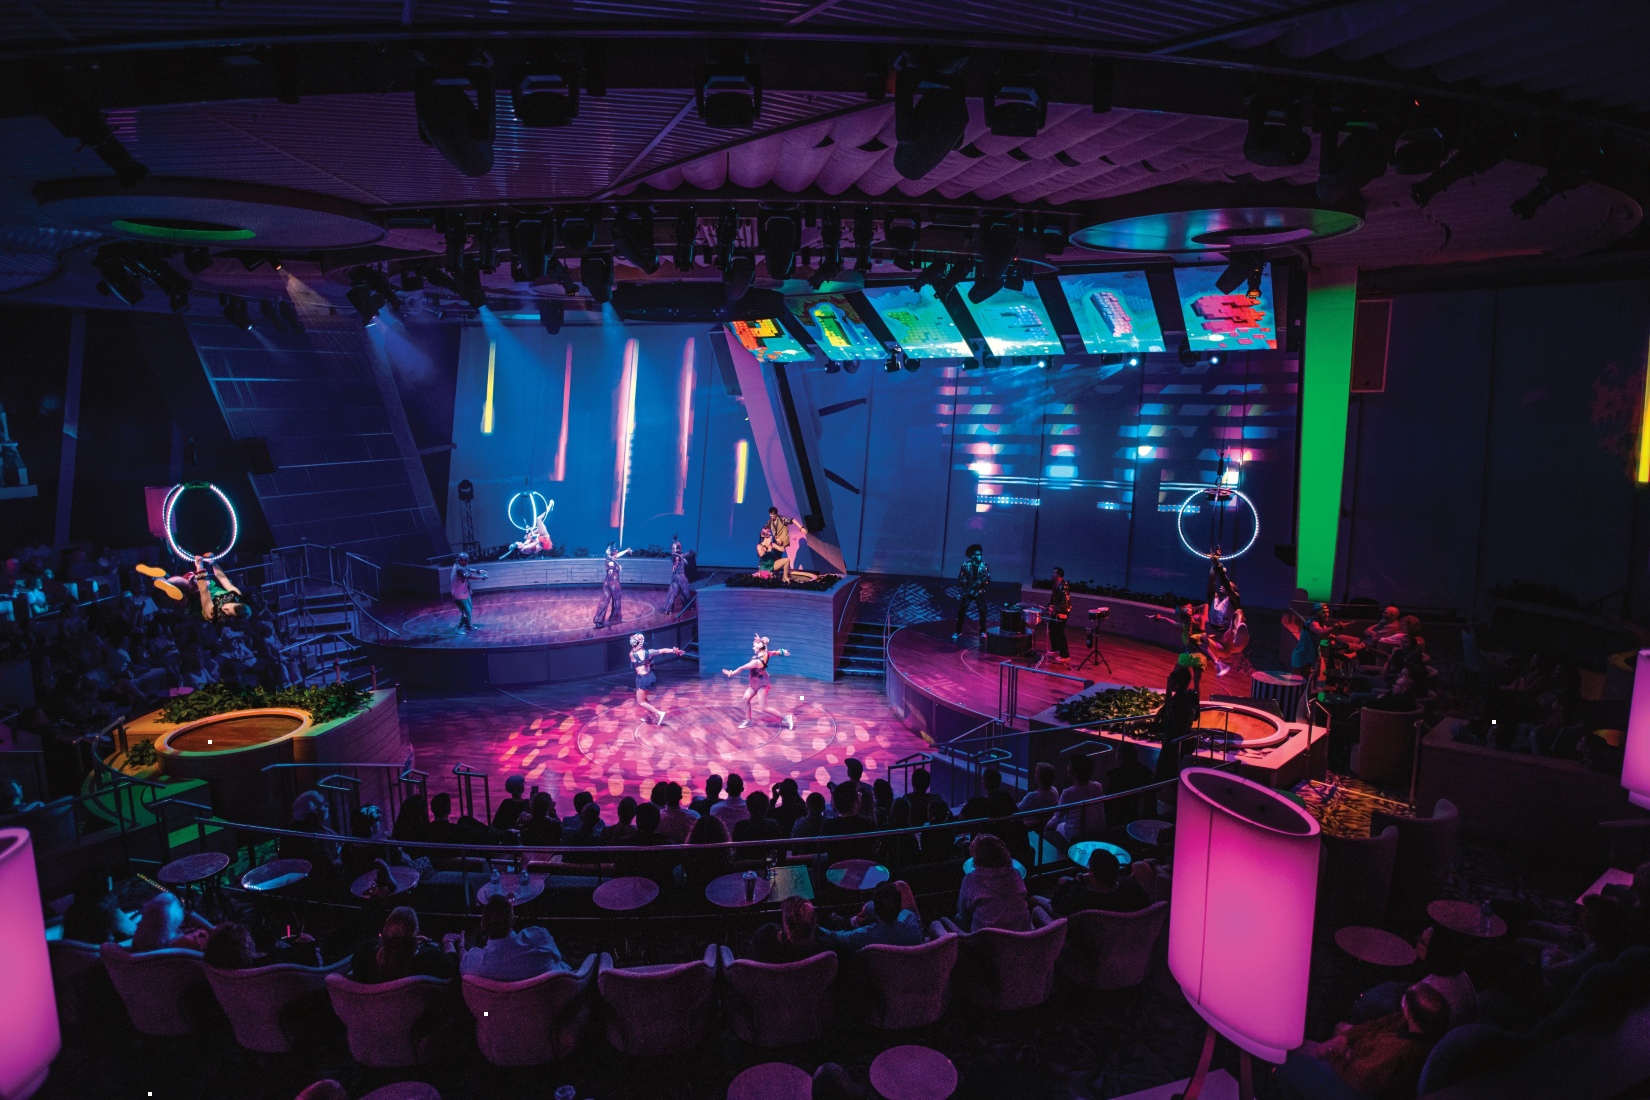 Behind the Scenes of the Entertainment on Odyssey of the Seas